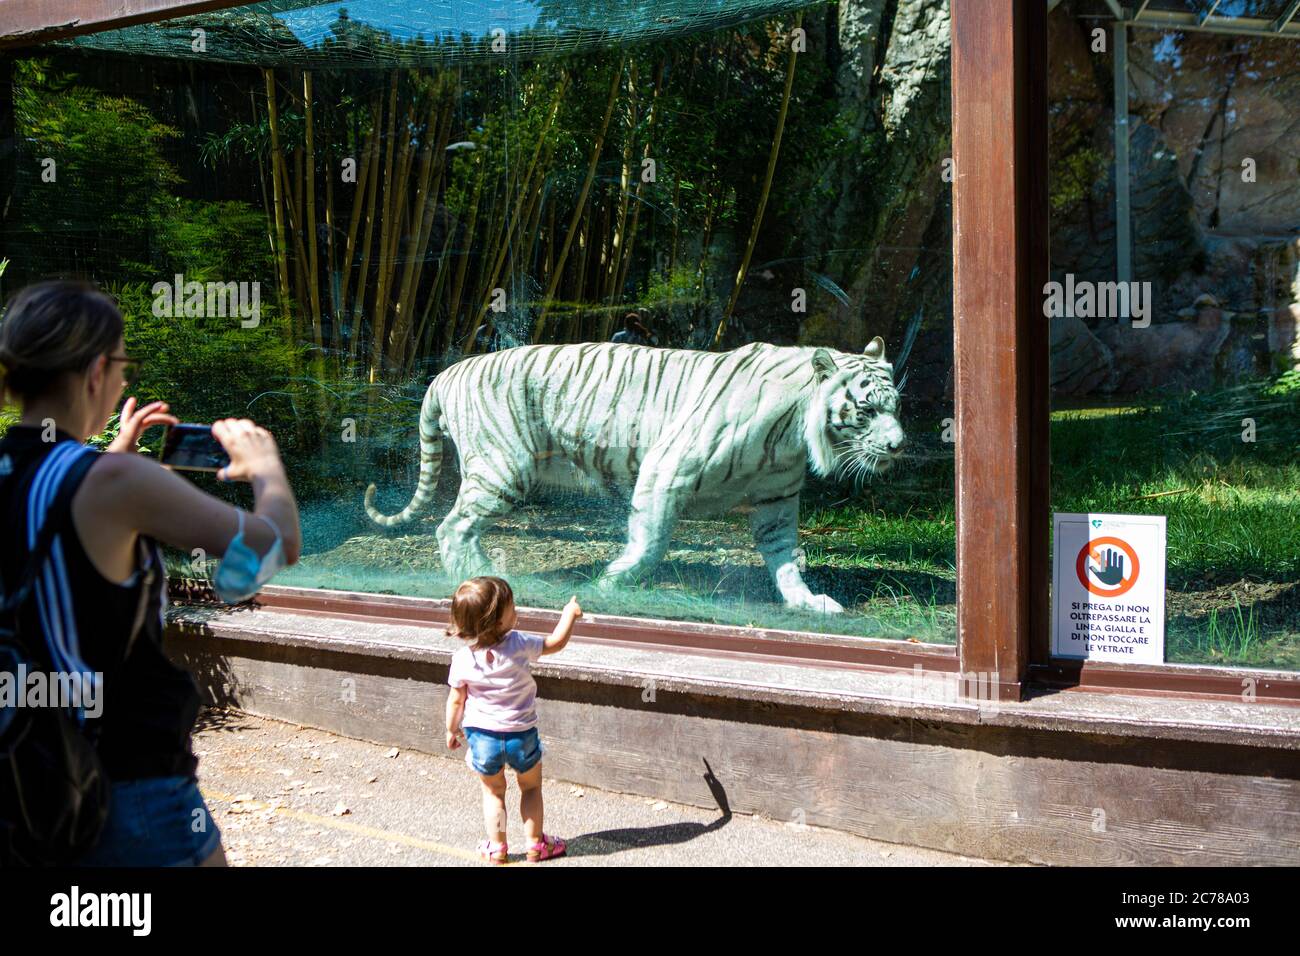 Young mother photographs a small child at the tiger enclosure at a zoo Stock Photo